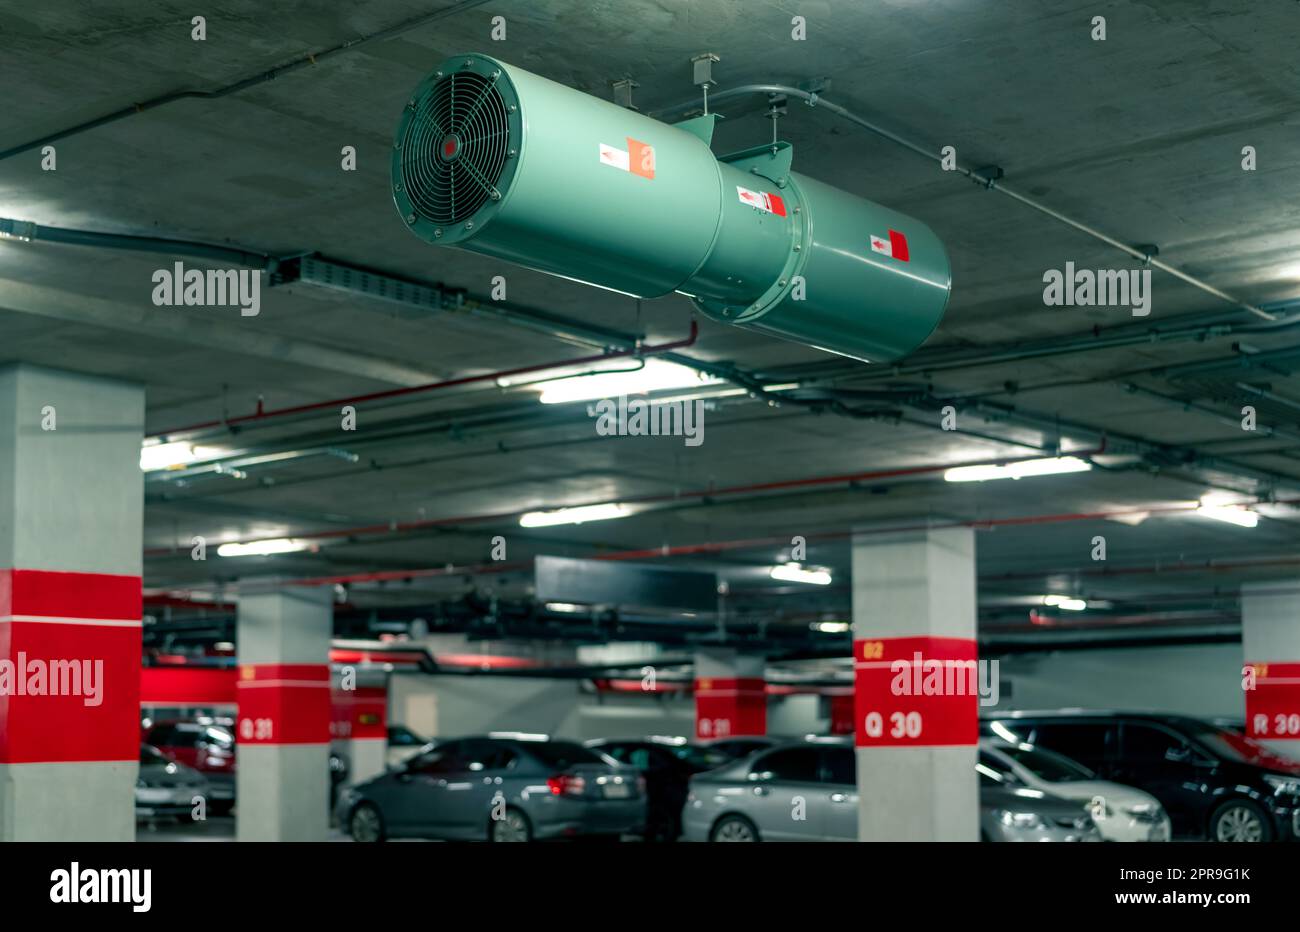 Jet fan at underground parking area. Ventilation fan in the parking lot.  Air flow system. Ventilation system in underground car parking lot at  commercial building. Duct fan air ventilation at mall Stock